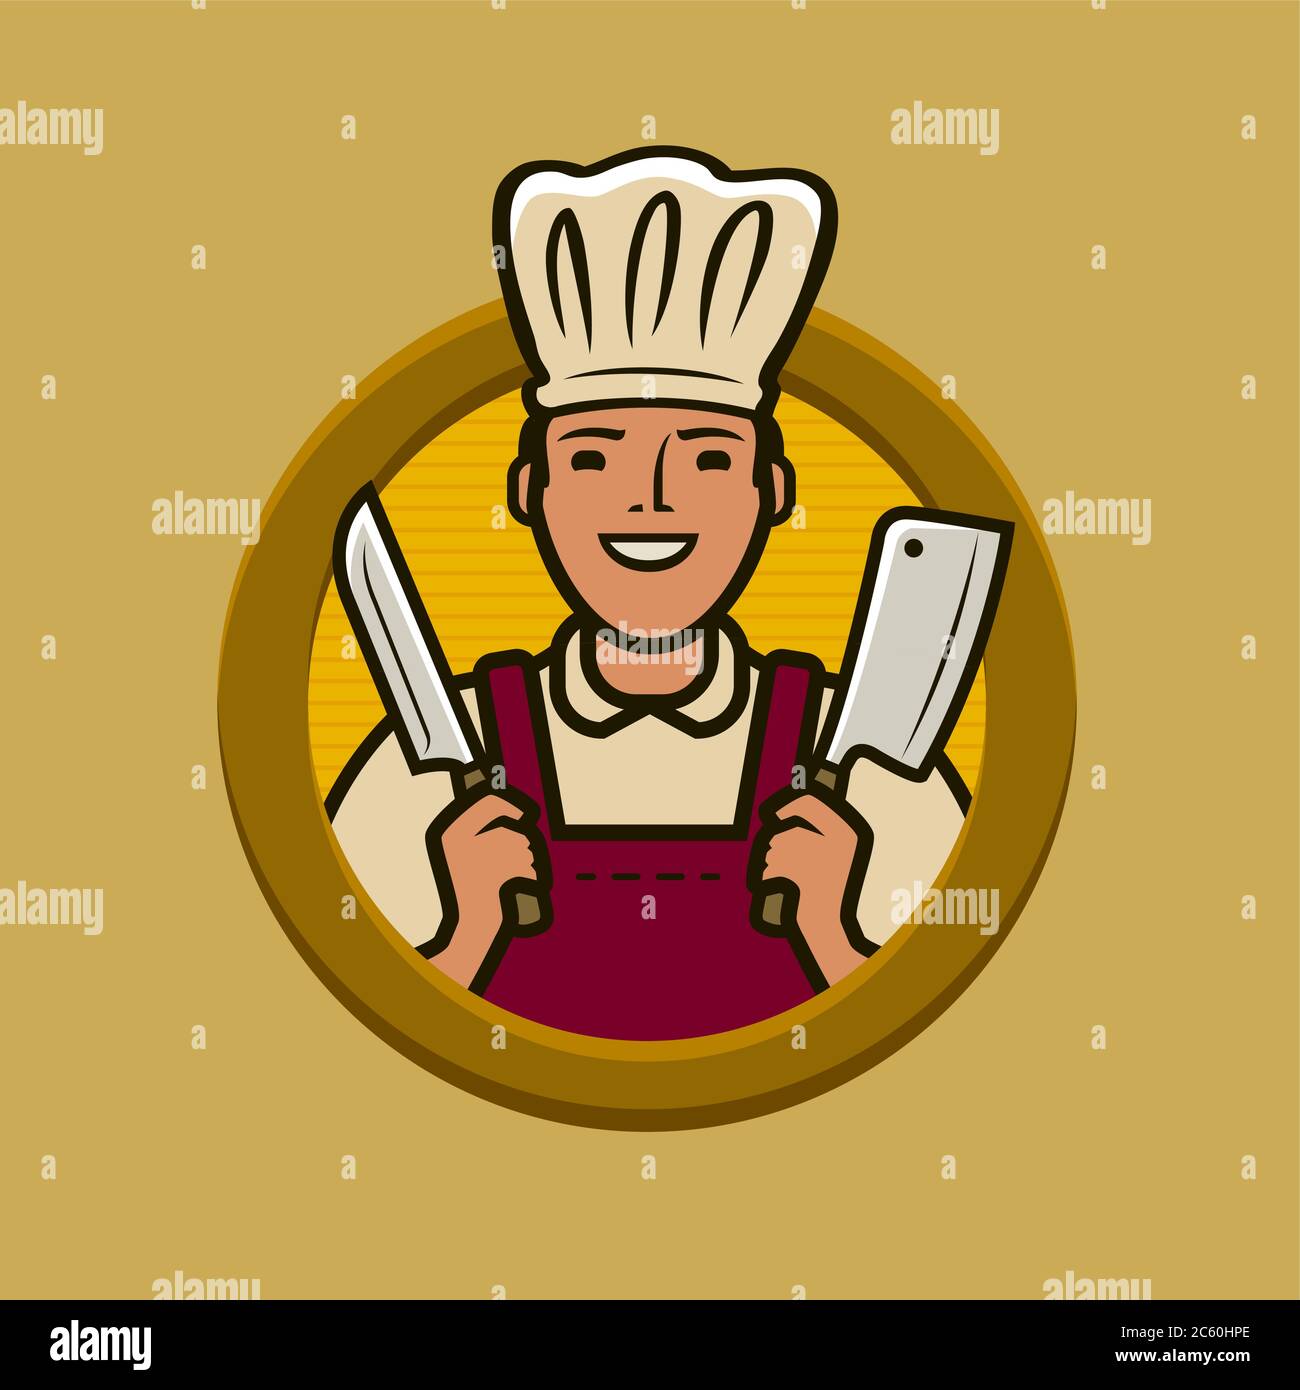 Butcher shop logo or label. Chef with knives vector illustration Stock Vector